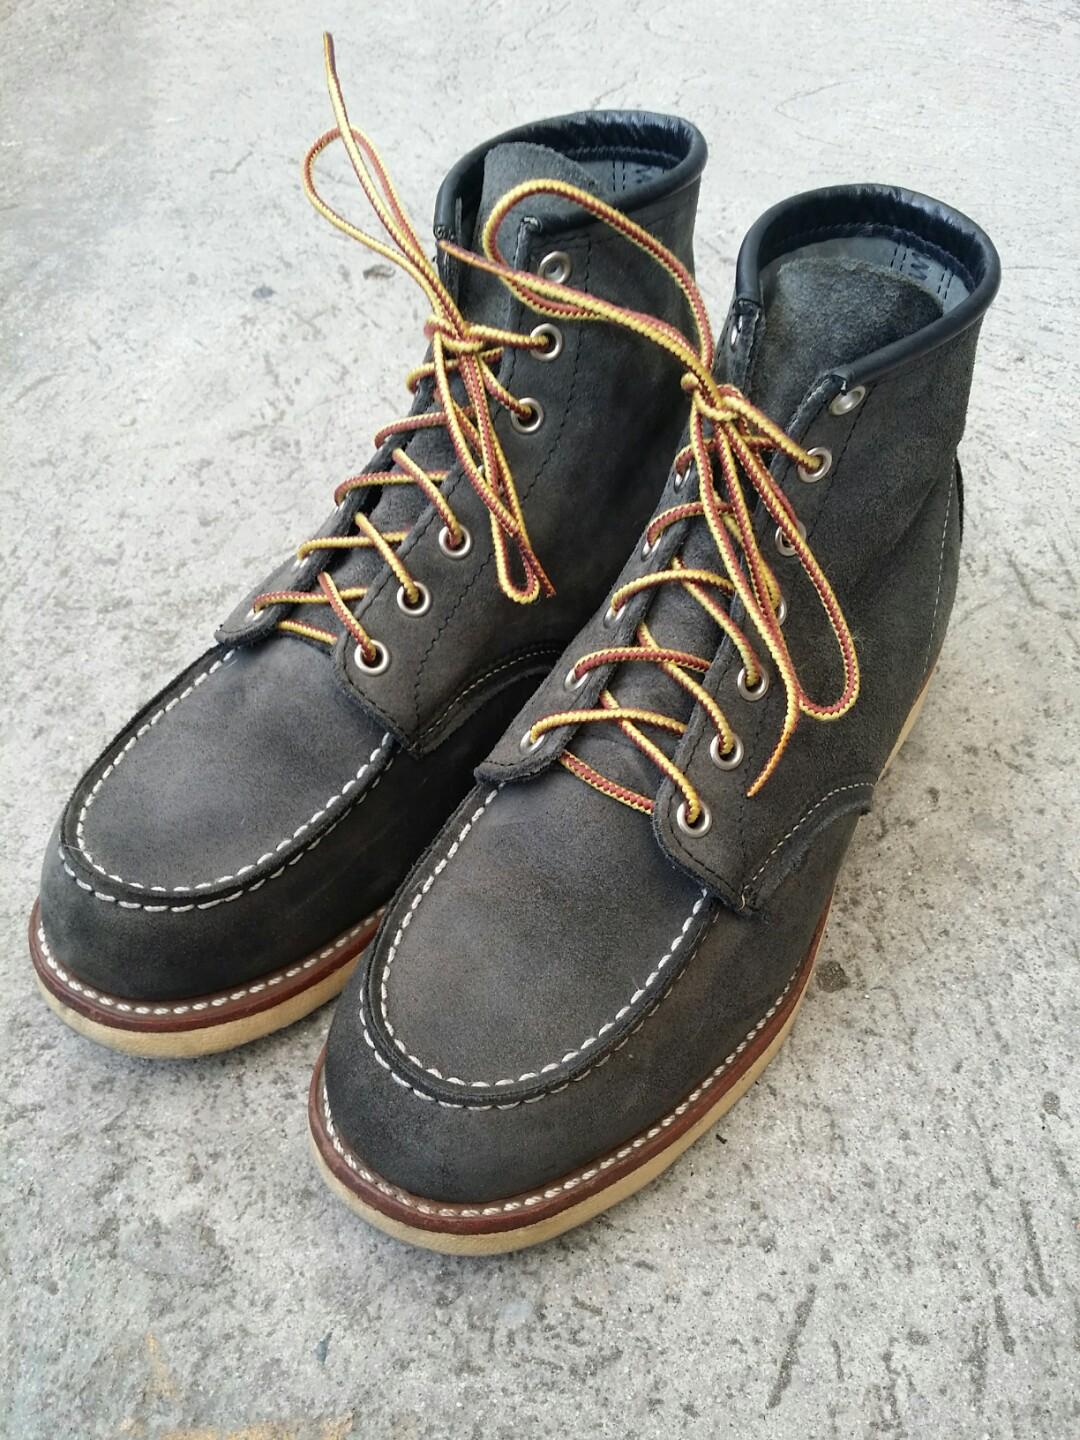 Redwing x Beams Japan 8854 Rare Navy Abilene Rough-out leather 8E us ...